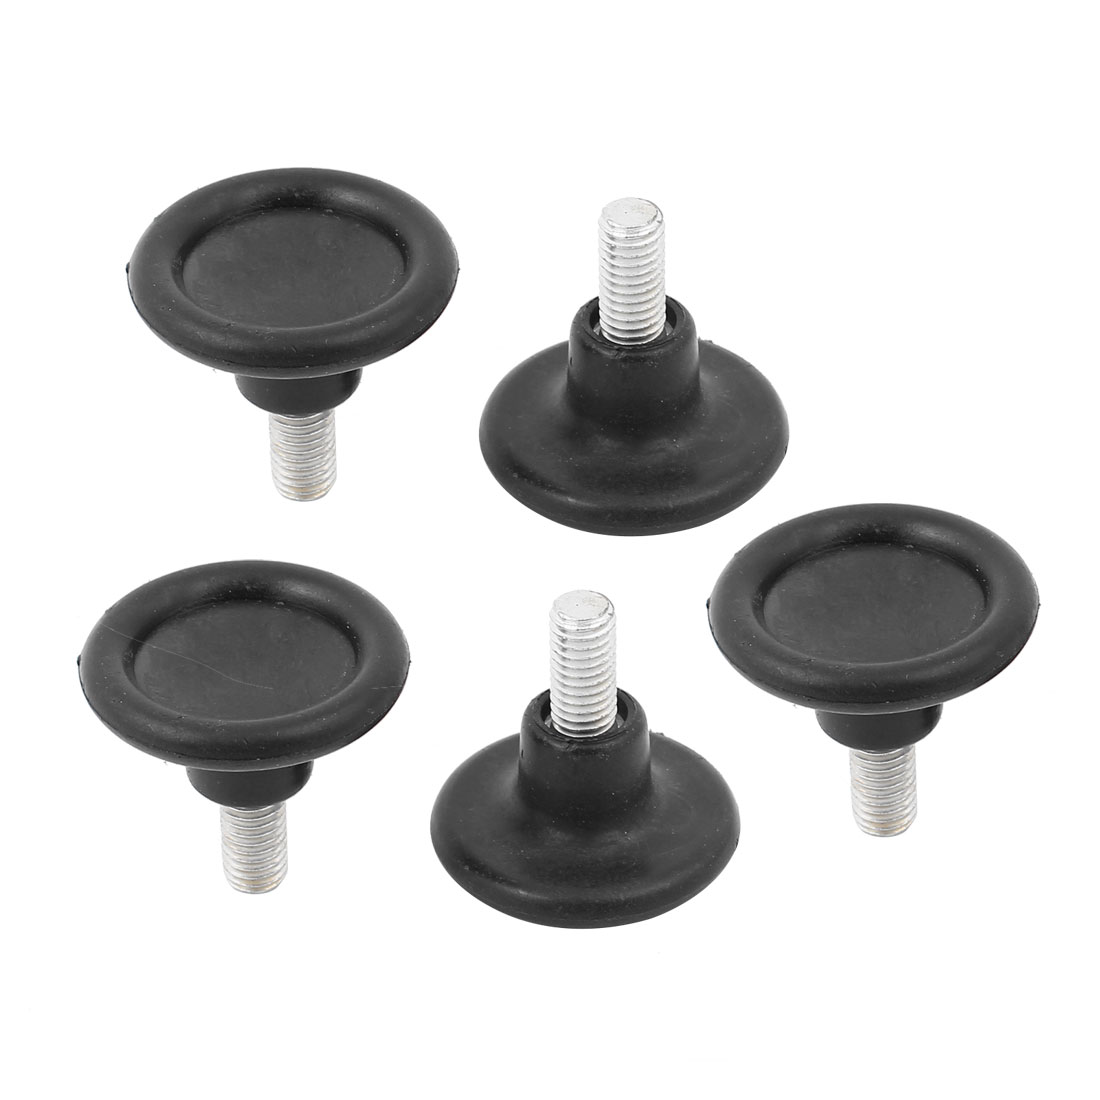 Unique Bargains Furniture Table Adjustable Screw On Leveling Glide Feet Legs Protector 5pcs